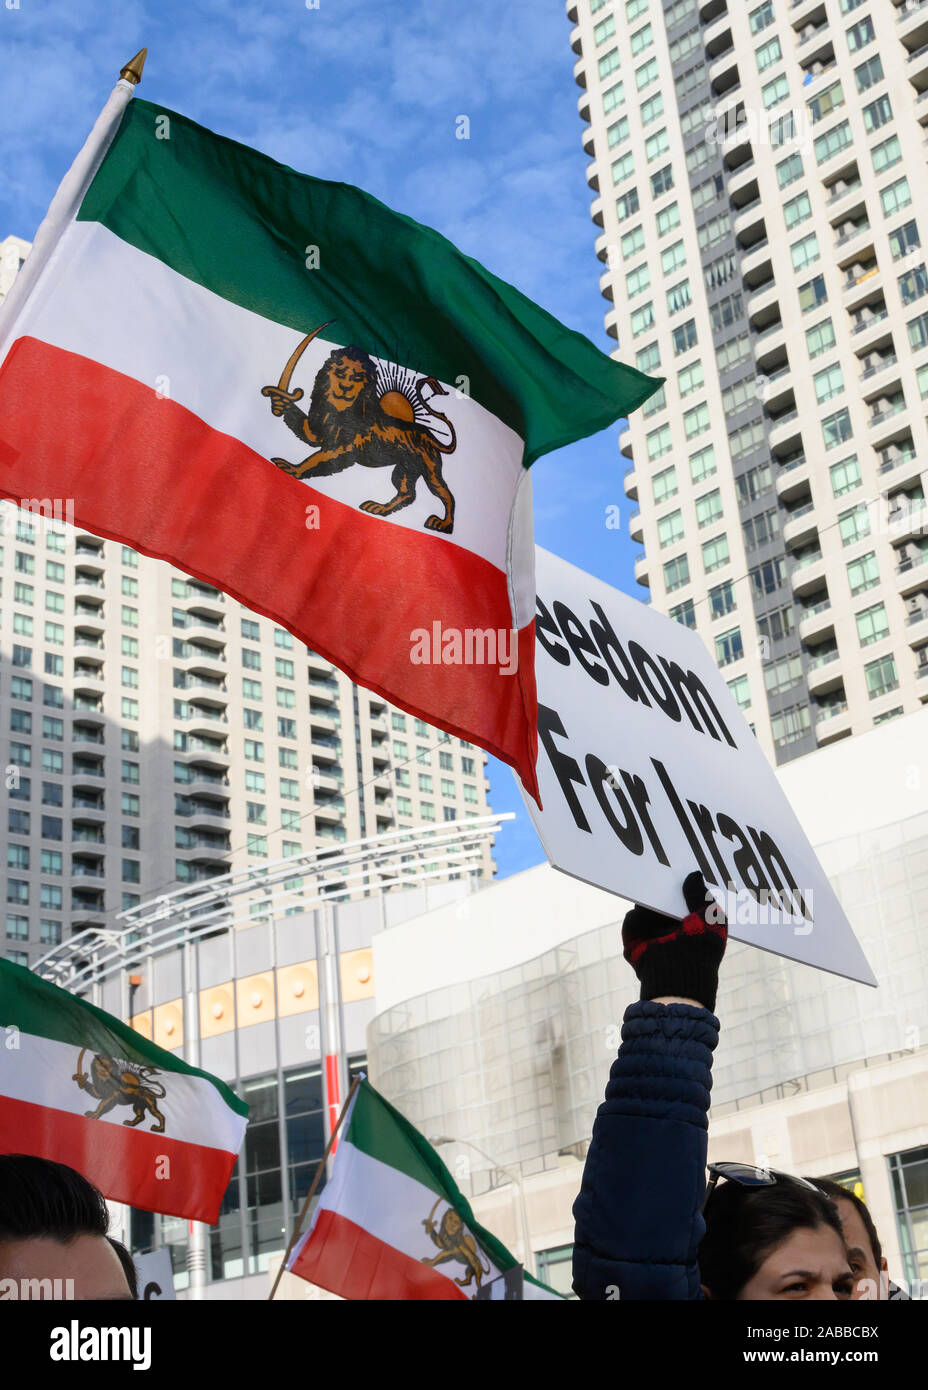 Torontonians gather at Mel Lastman Square to show support for the protesters in Iran while condemning the regime, while a pre-revolution flag waves. Stock Photo